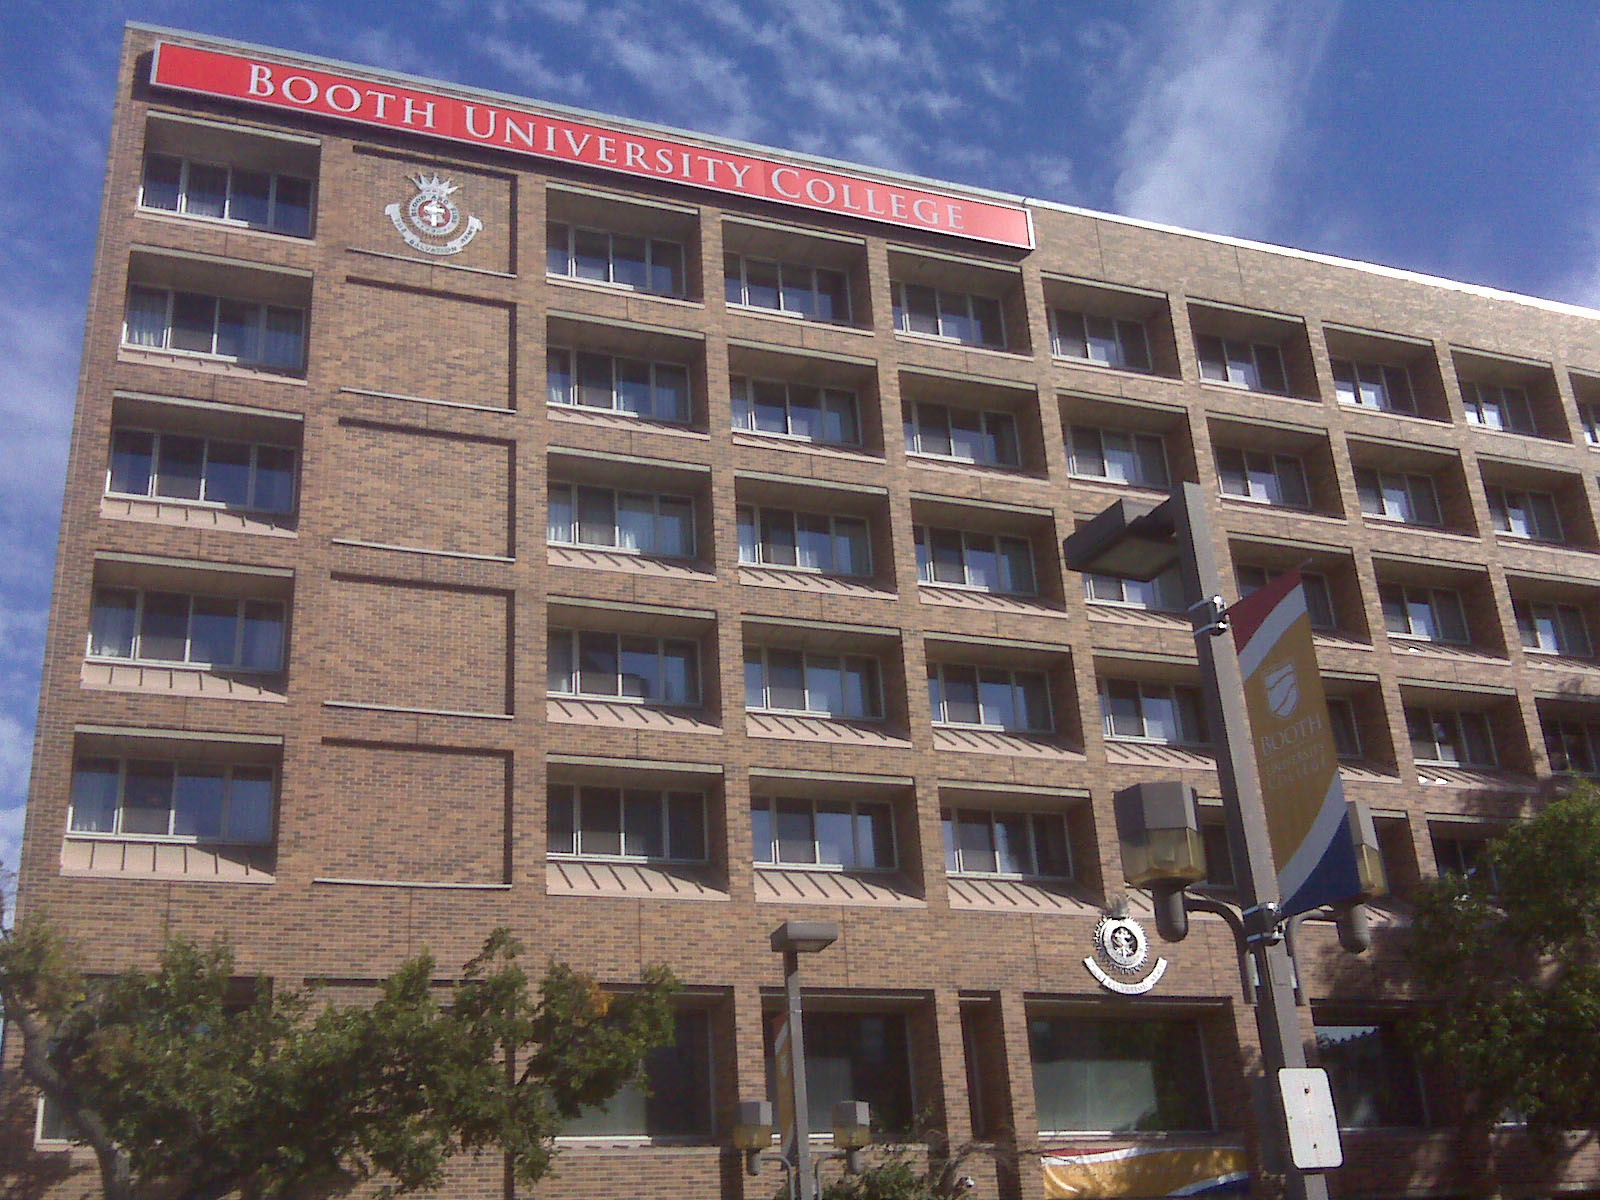 A seven-story brick building with a red sign across the top reading Booth University College.